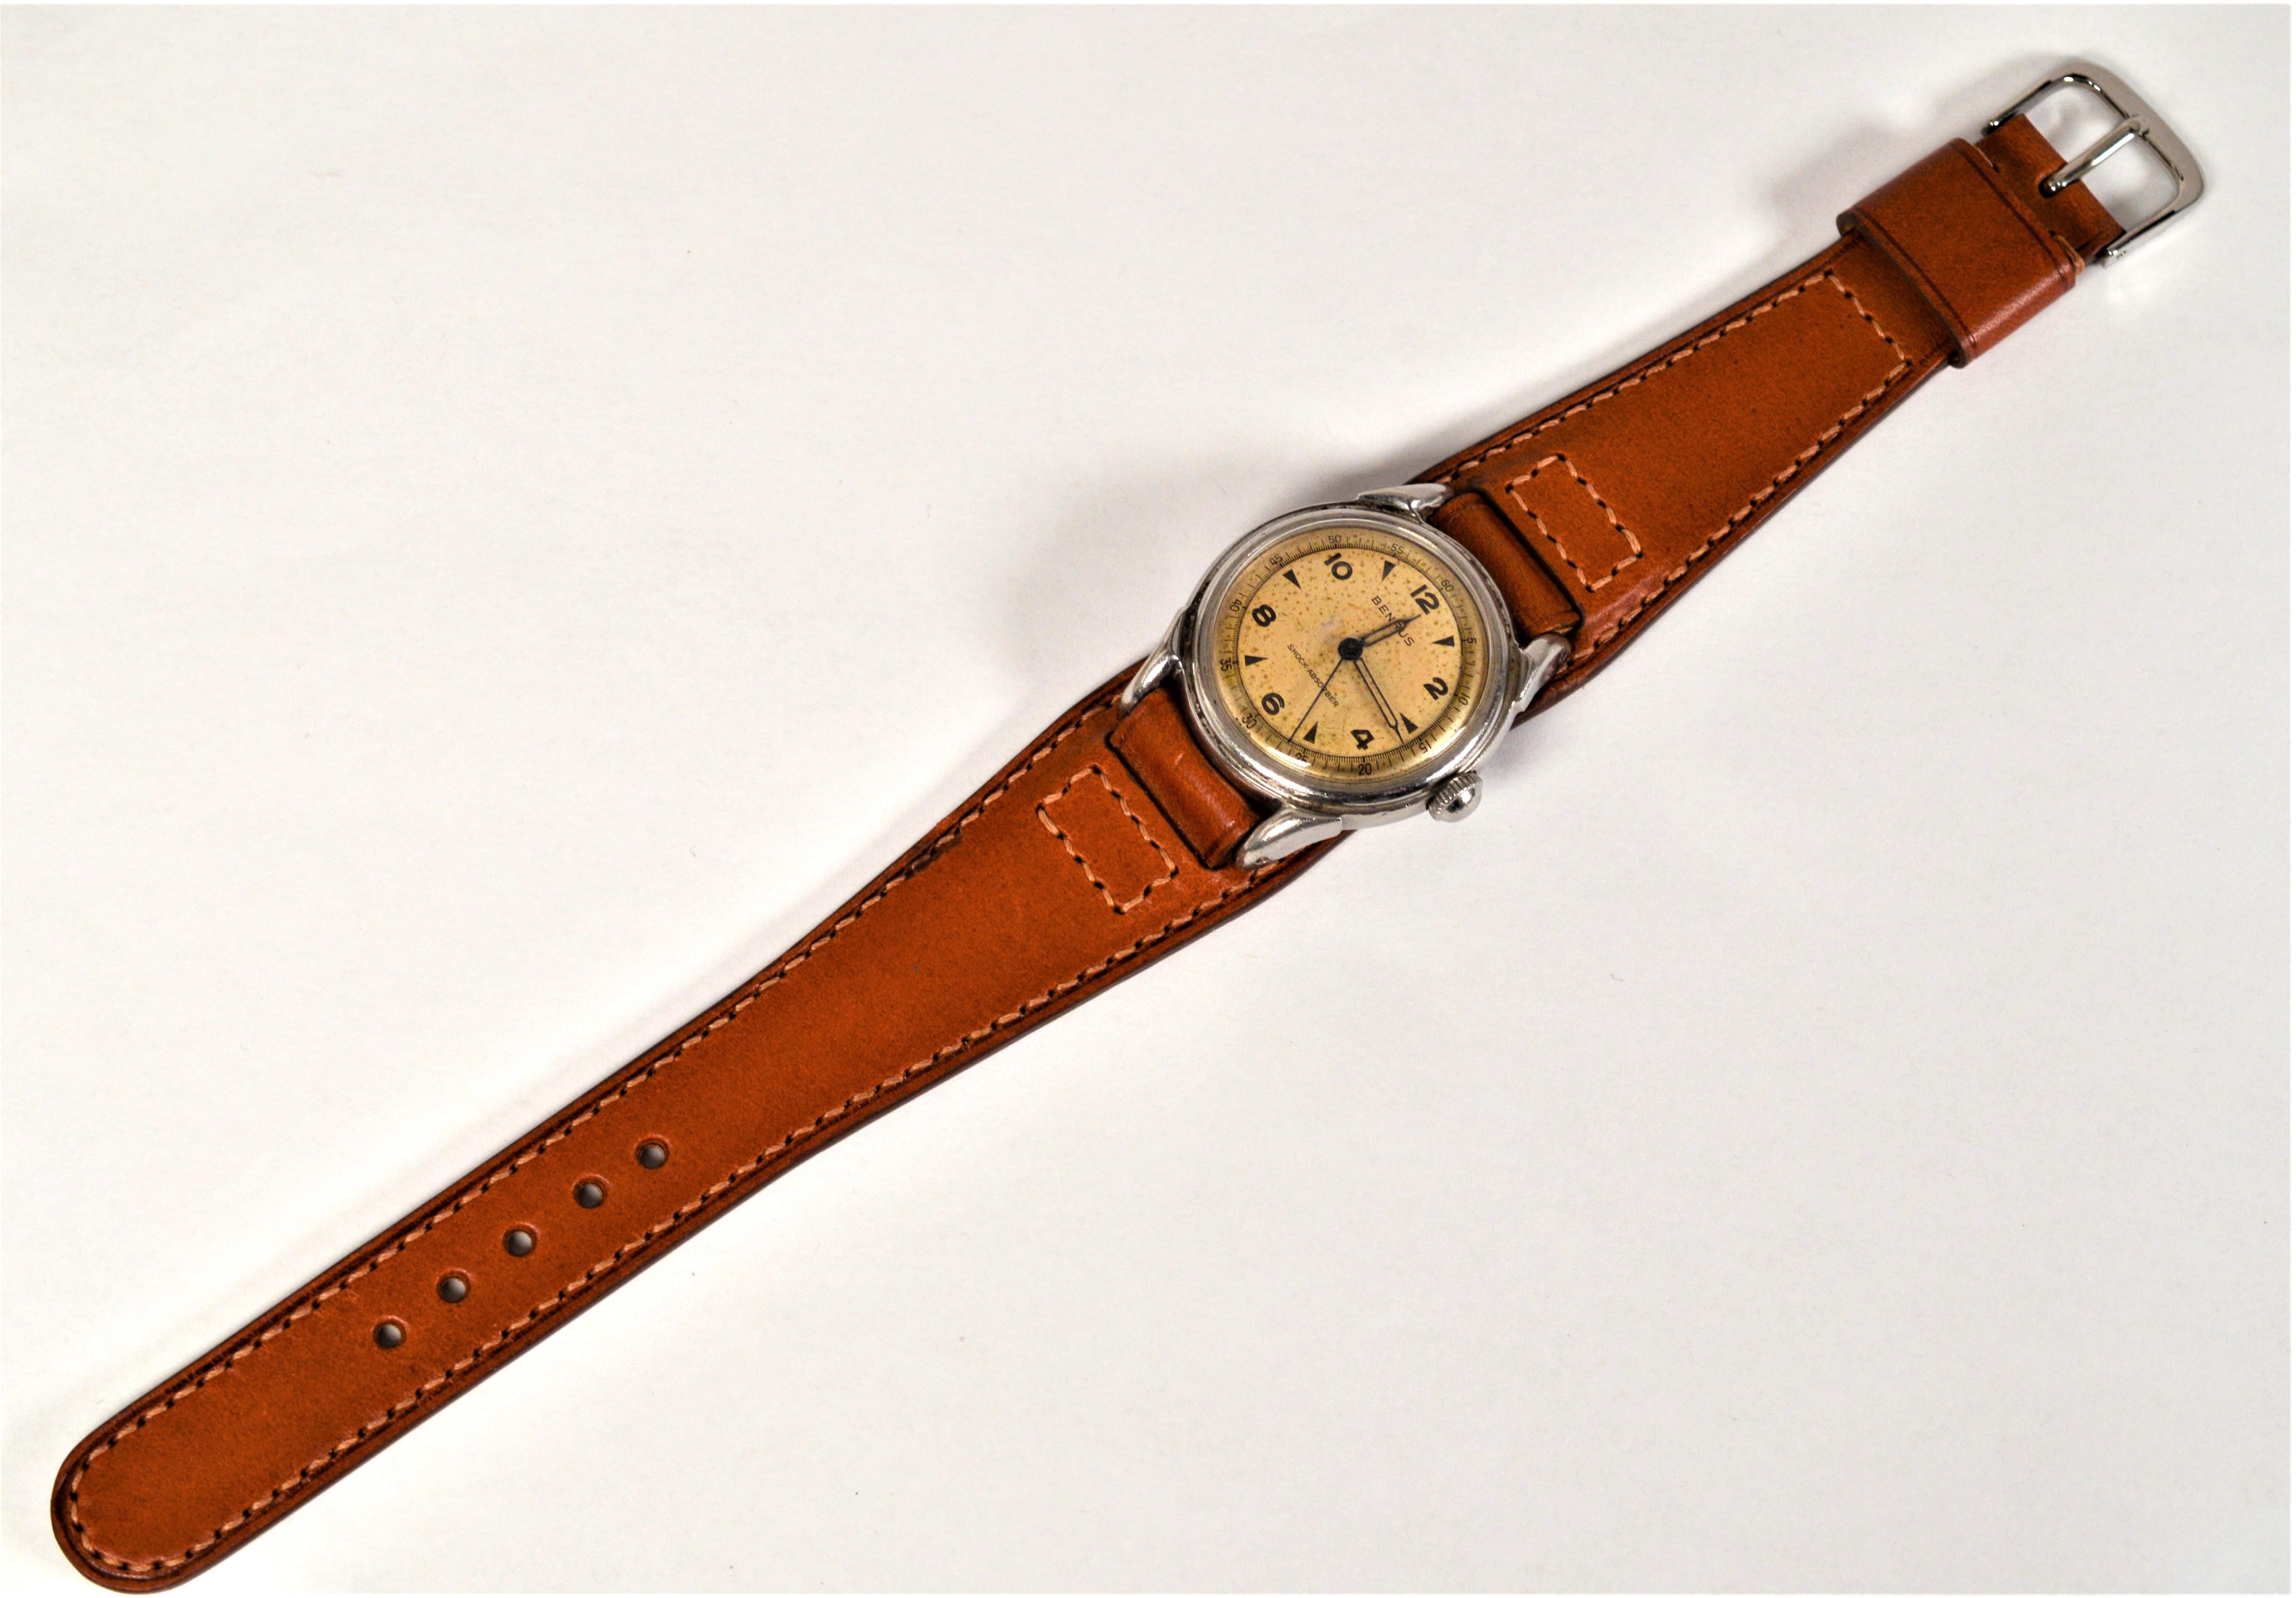 Men's Vintage Benrus Military Style Wrist Watch with Leather Bund Strap For Sale